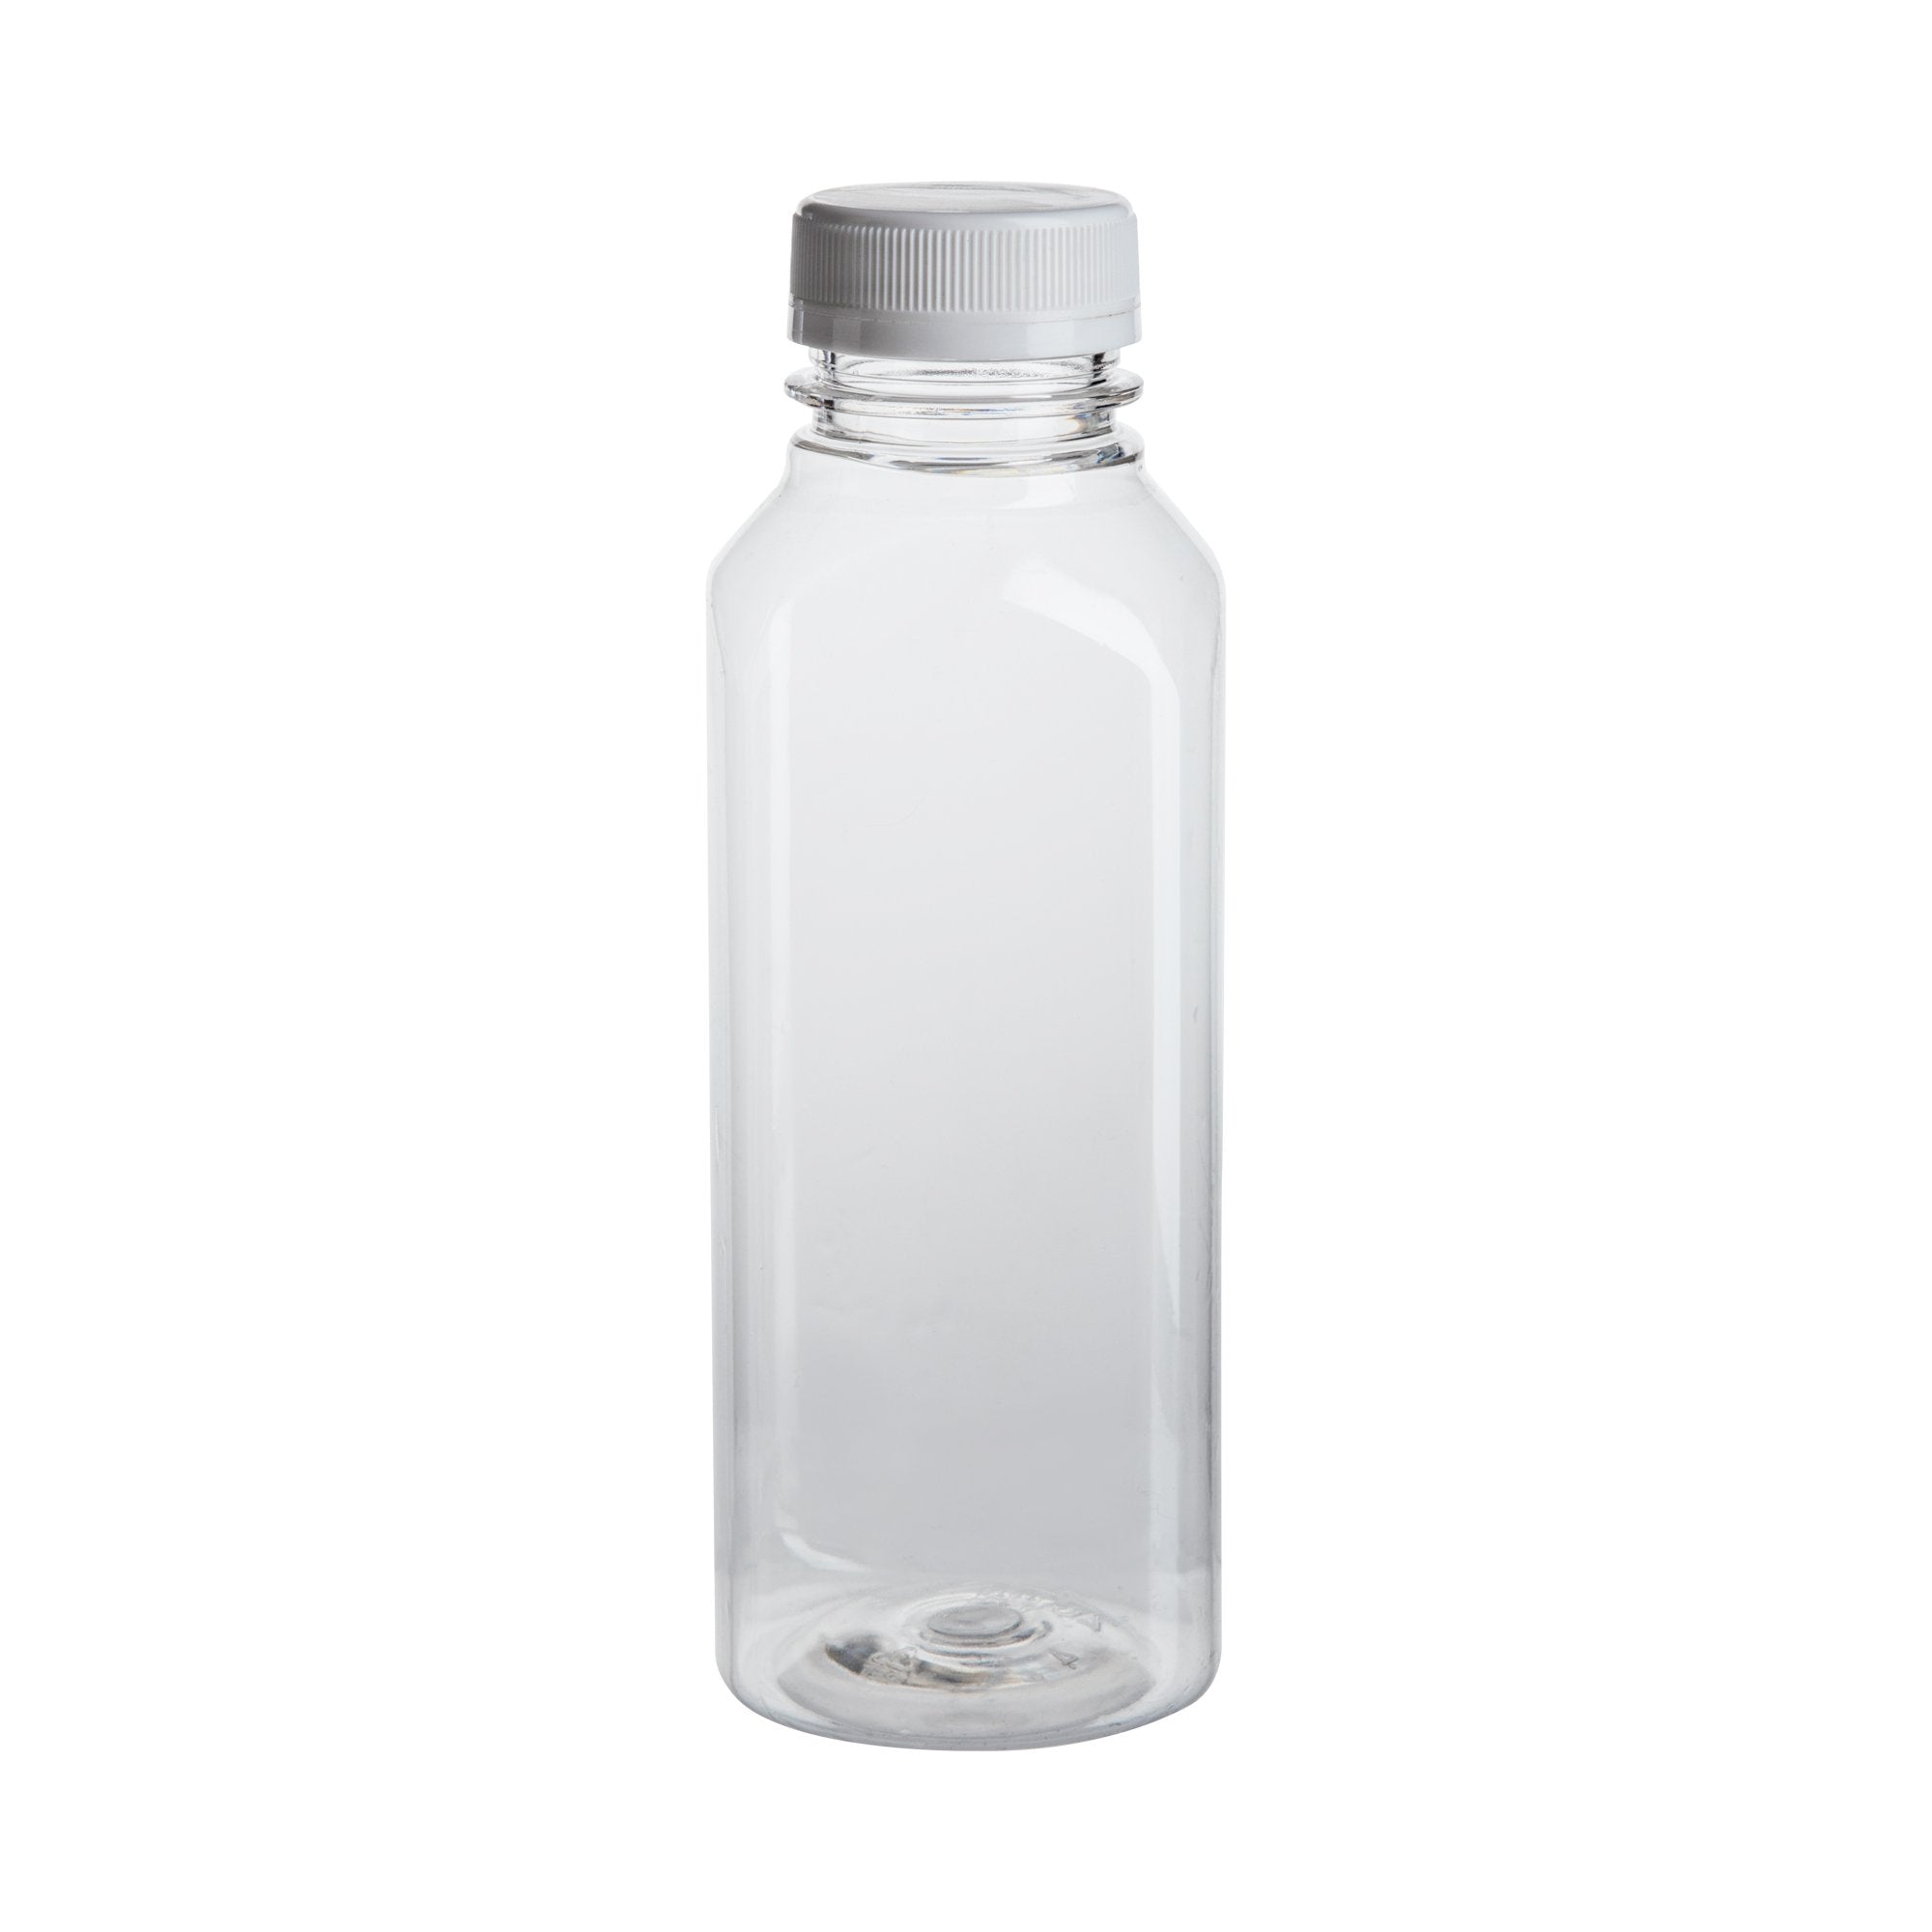 16 oz Square Clear Plastic Cold Pressed Juice Bottle - with Safety Cap - 2  1/4 x 2 1/4 x 7 - 100 count box